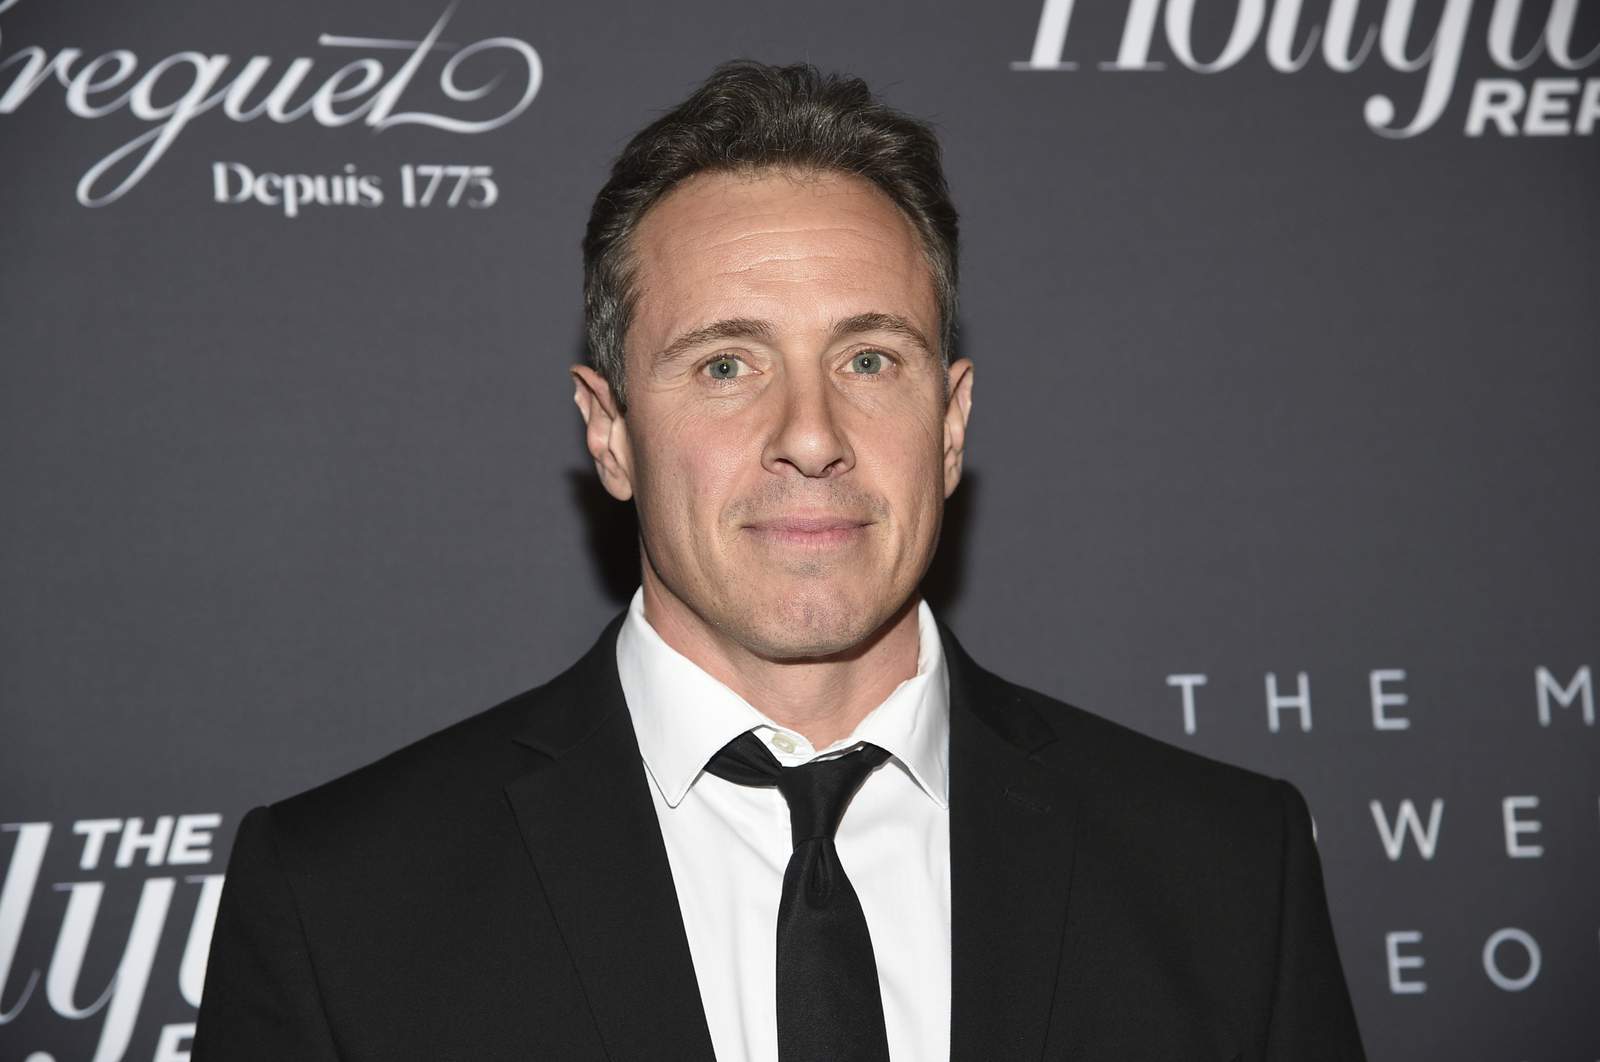 Reports say CNN's Chris Cuomo got special COVID-19 testing